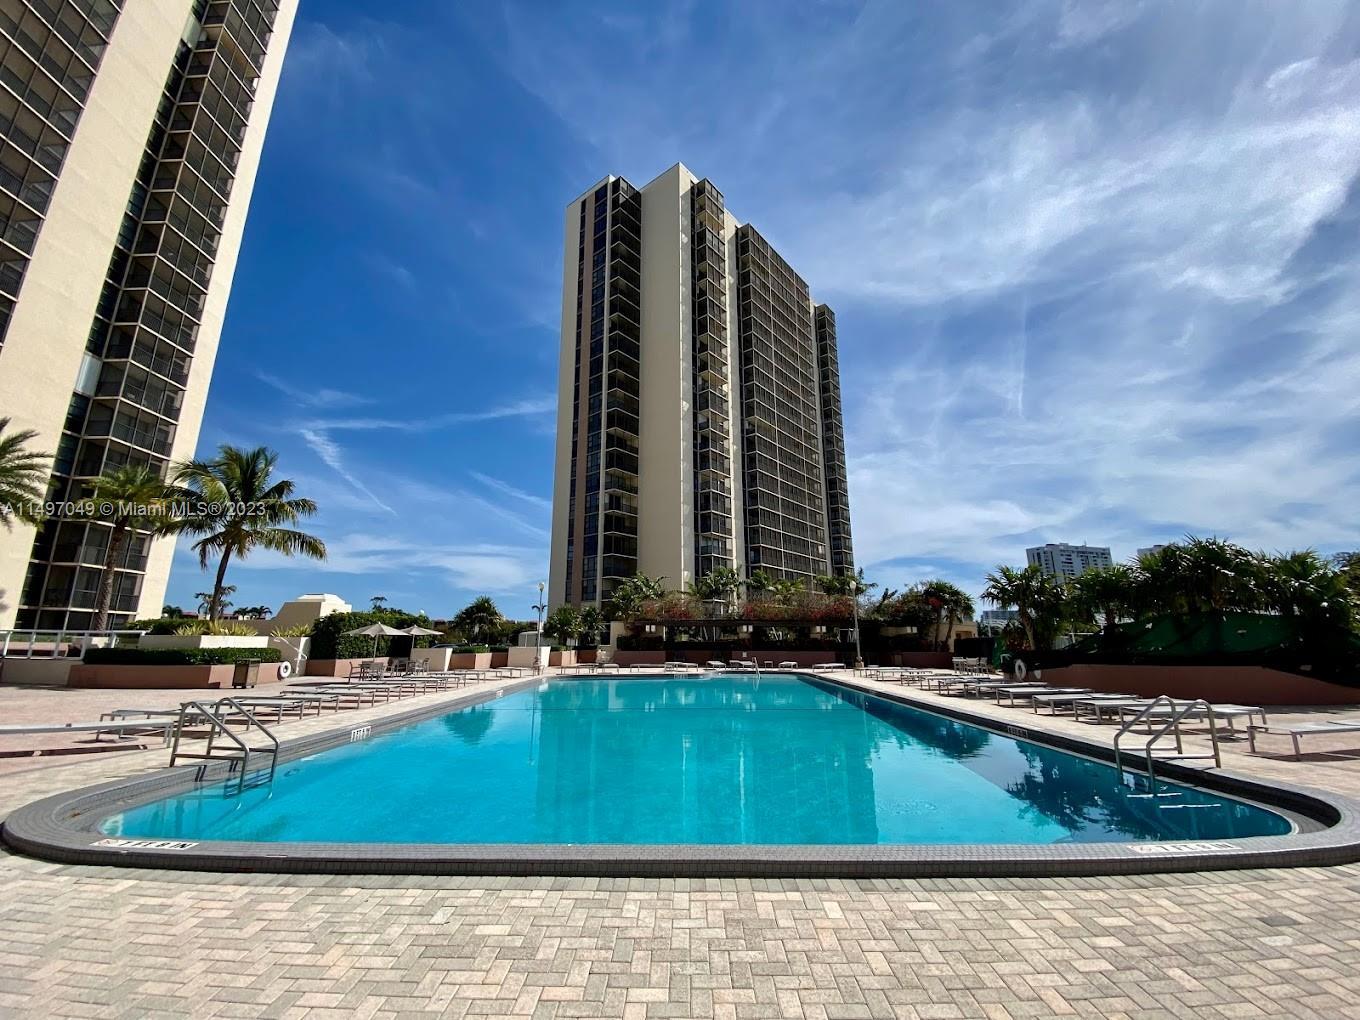 Photo of 20301 W Country Club Dr #1424 in Aventura, FL